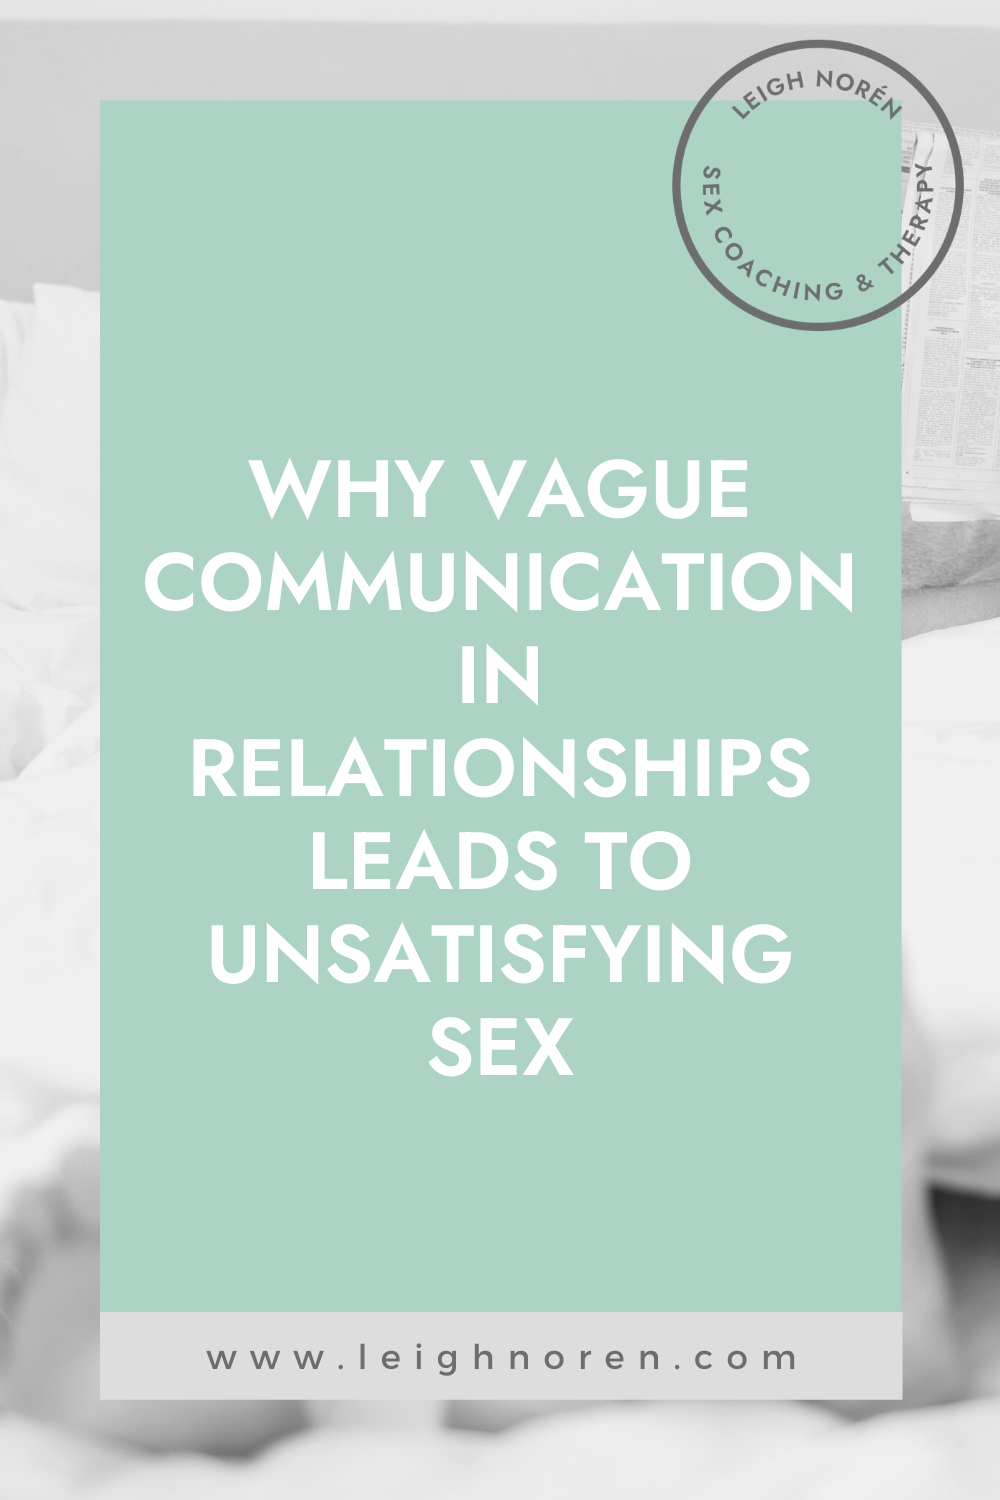 Why Vague Communication in Relationships Leads to Unsatisfying Sex